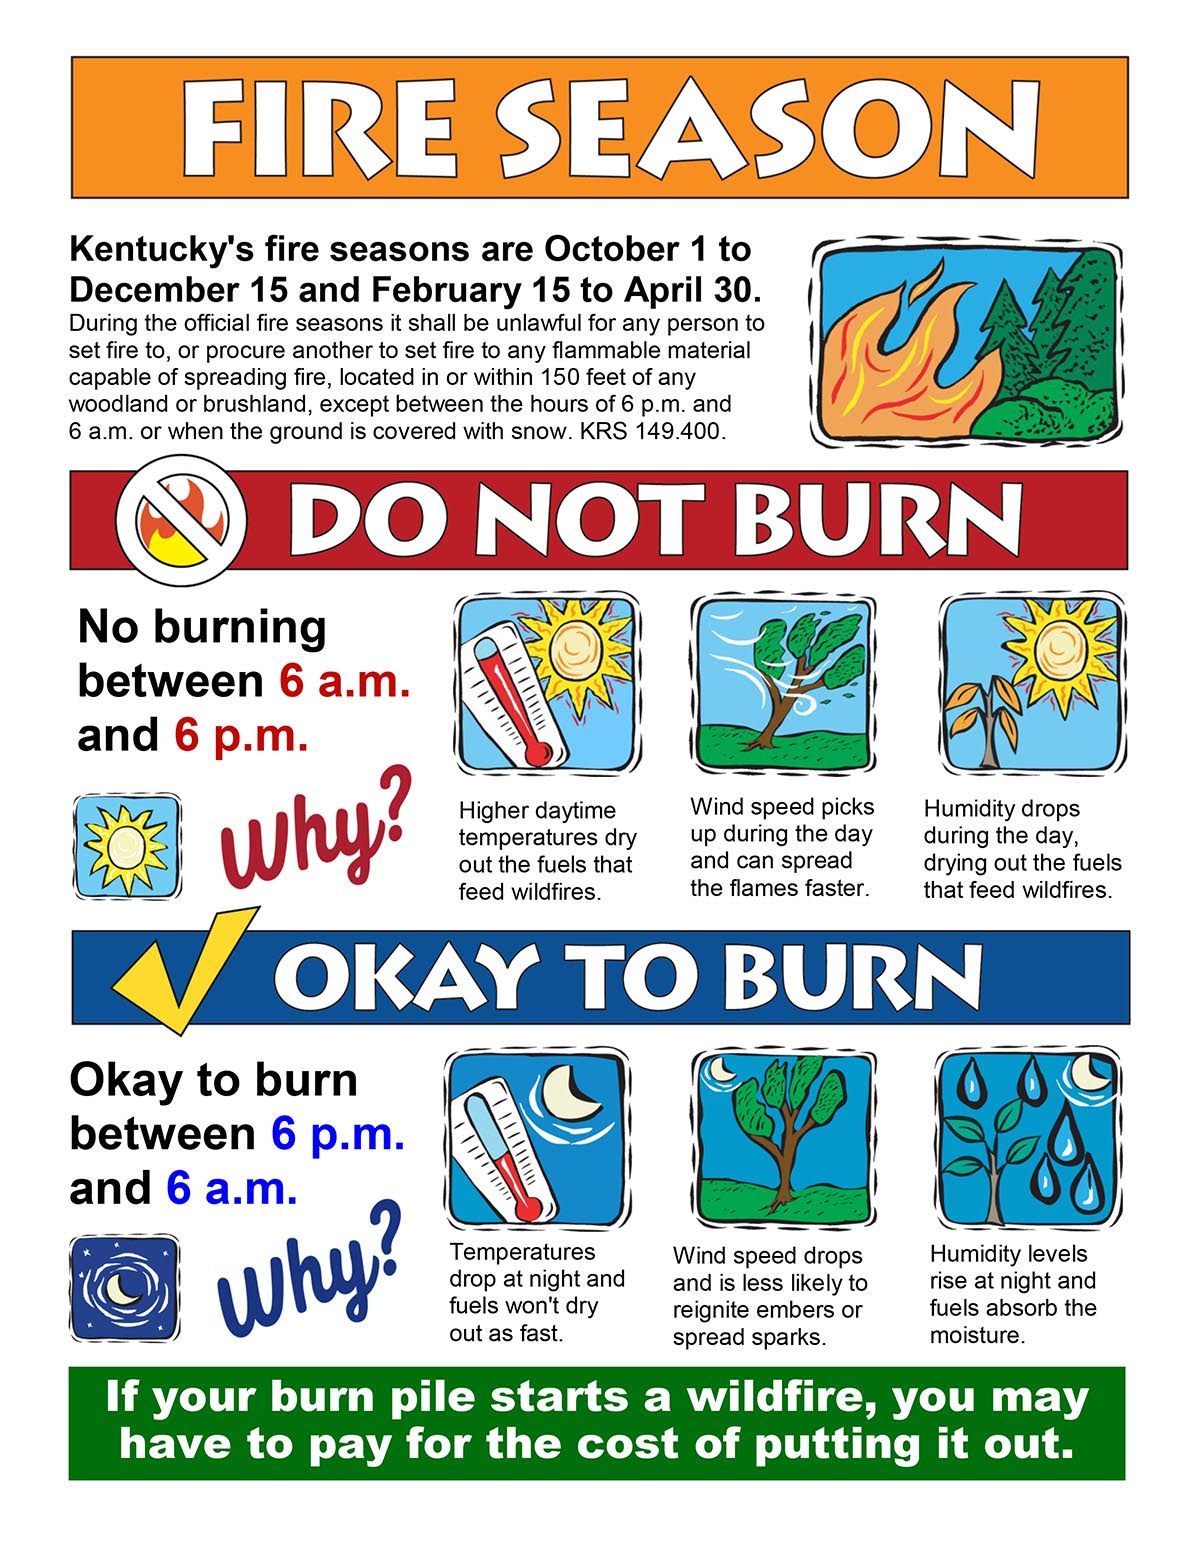 Kentucky Division of Forestry Logo, Fire Season, US Forest Service Shield; Flame in trees; Flame with prohibited slash, do not burn; 3 Graphics in a row showing thermometer and sun, second shows wind in trees, third shows sun wilting plant; SUN; why; 3 Graphics in a row showing thermometer and sun, second shows wind in trees, third shows sun wilting plant; Checkmark with OK to burn; Kentucky Division of Forestry Logo, Fire Season, US Forest Service Shield; Flame in trees; 